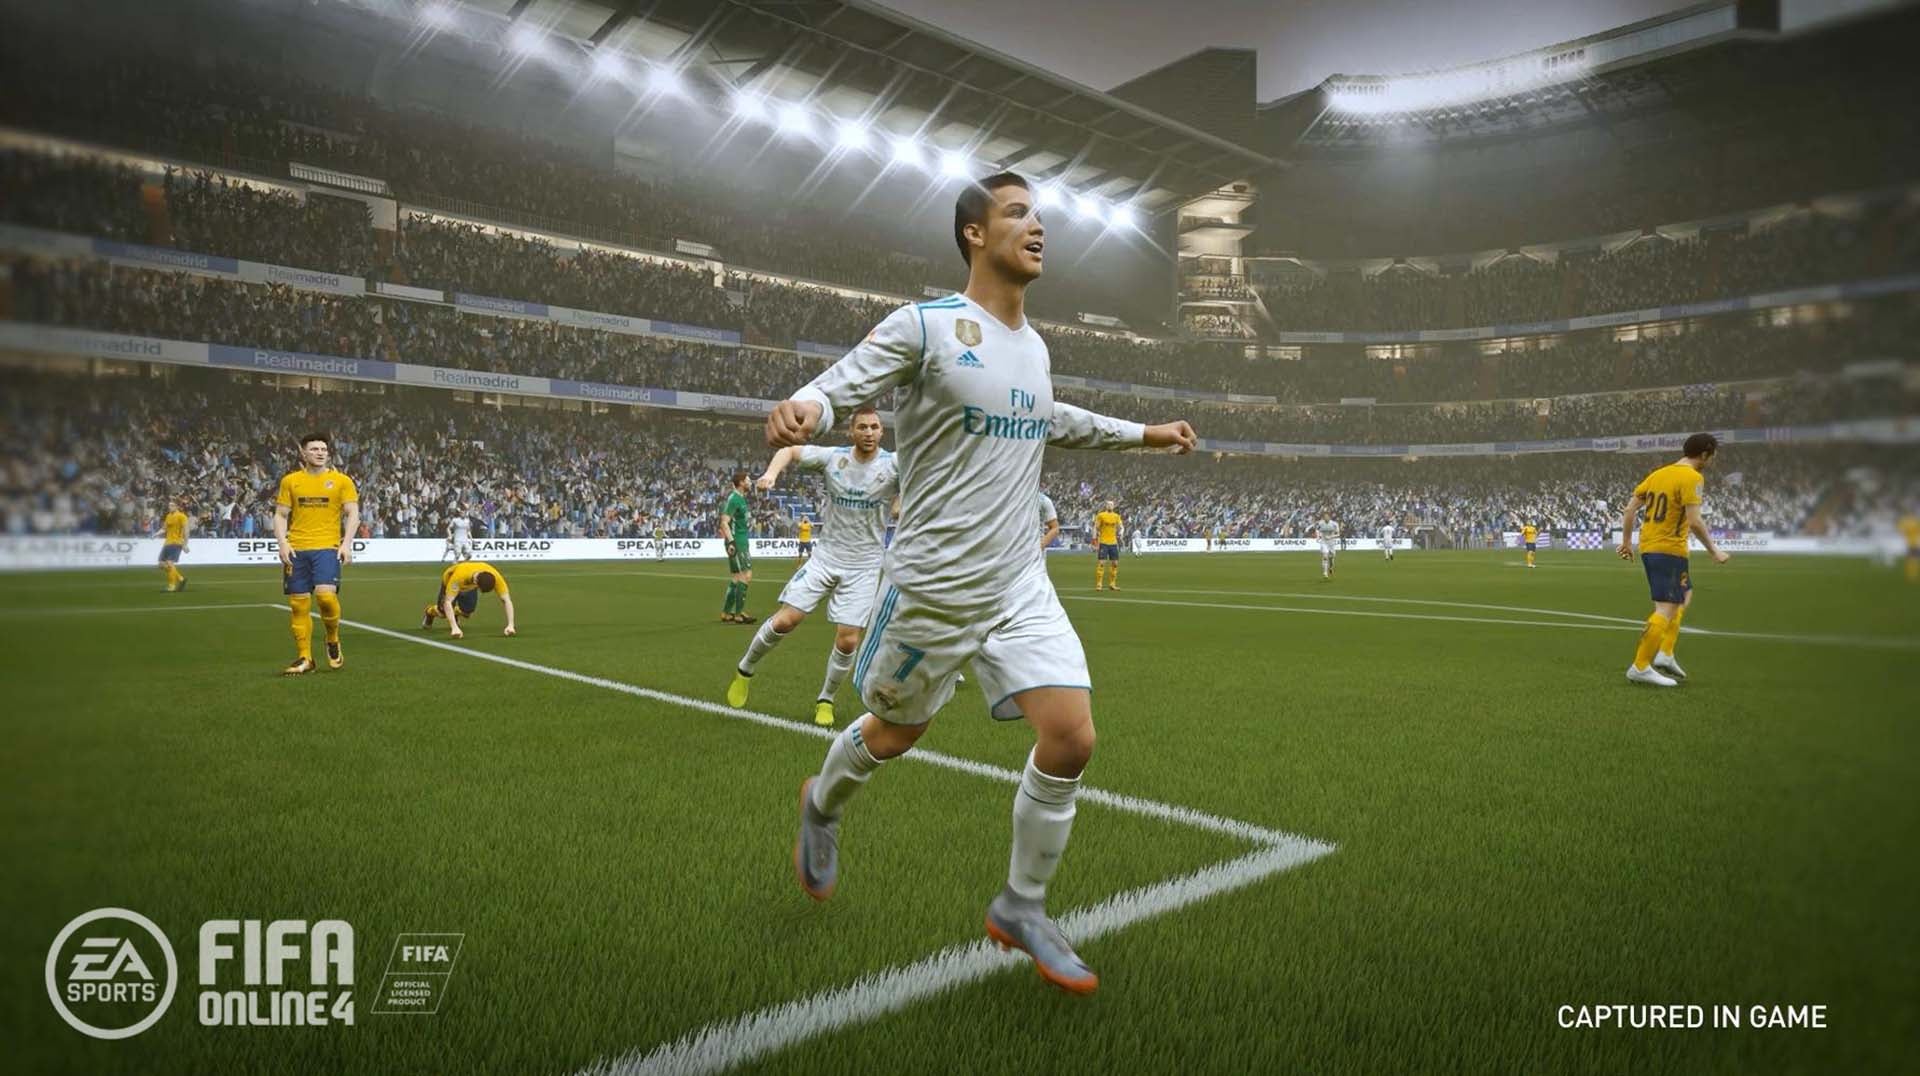 Image for FIFA Online 4 will be unaffected by EA and FIFA split